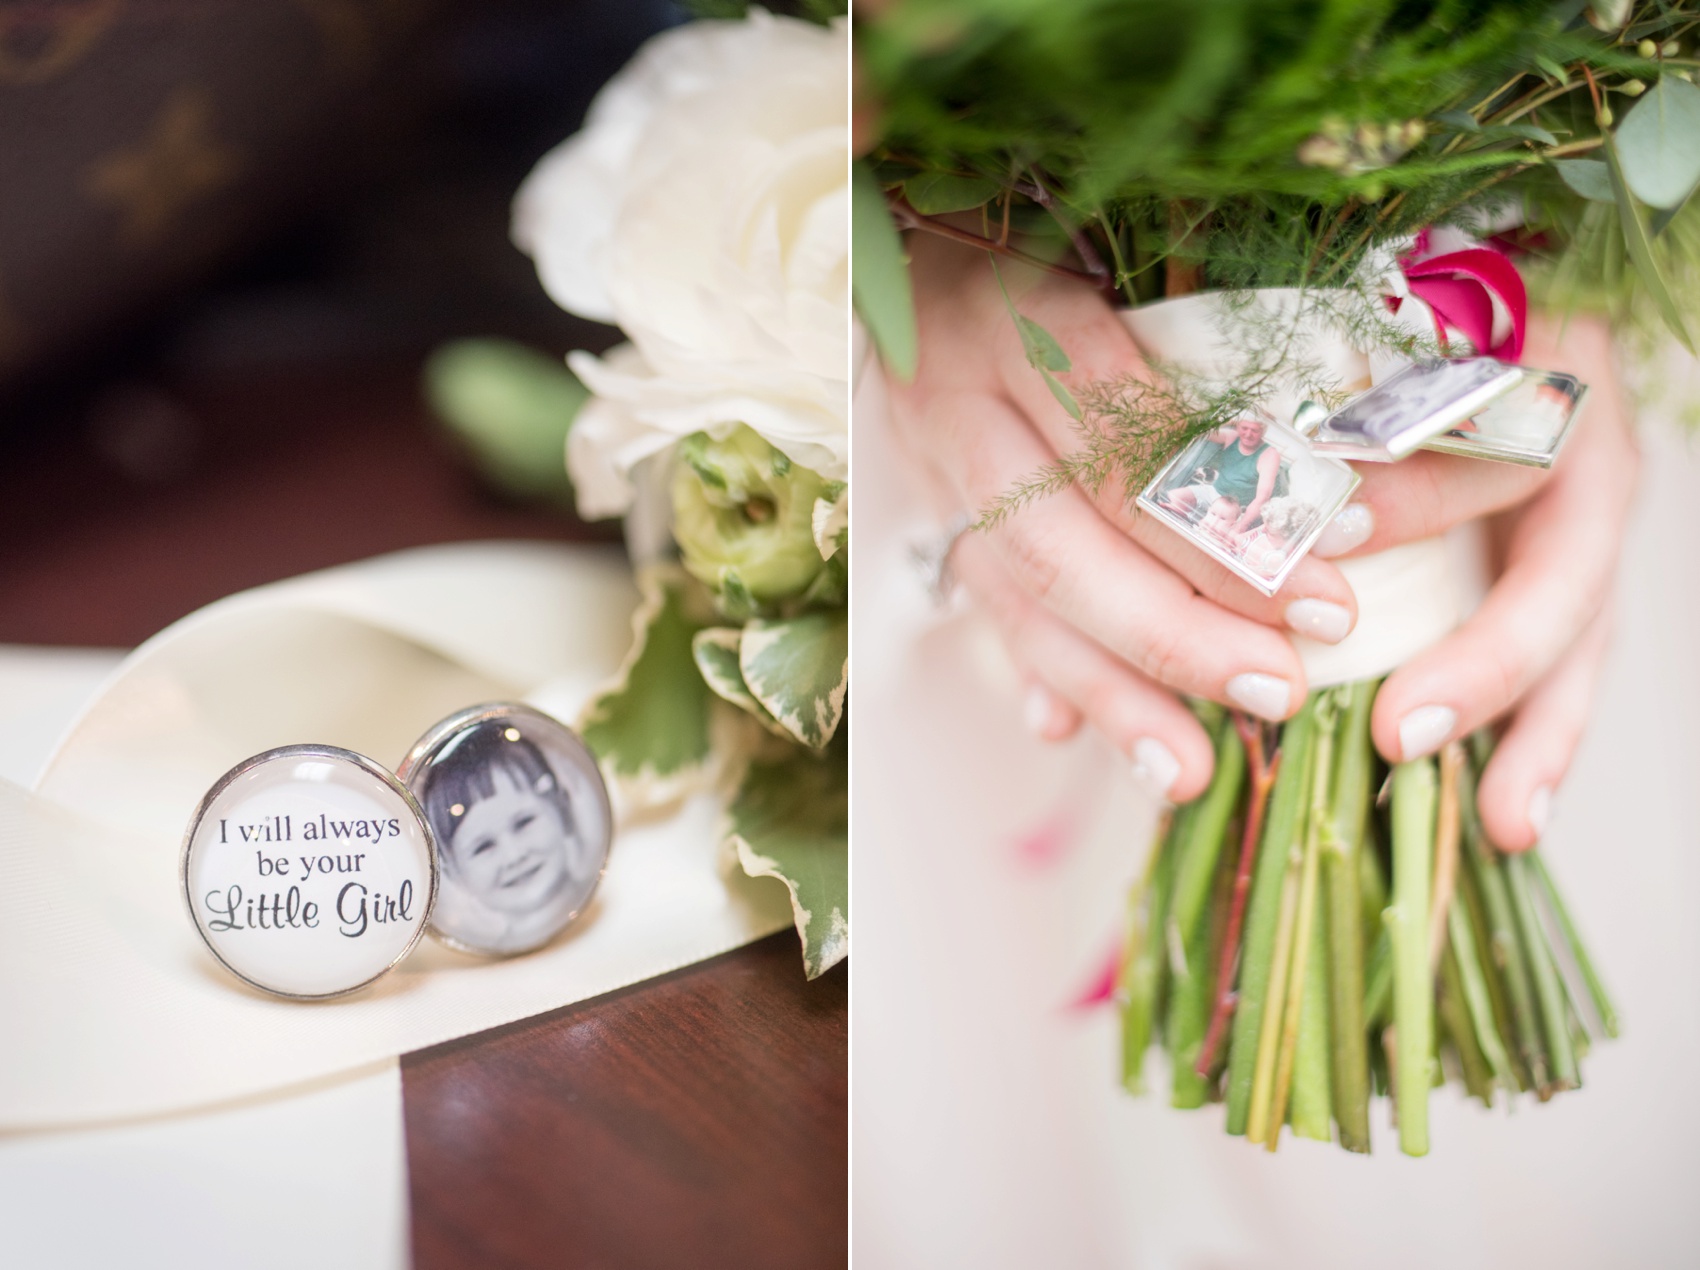 Olde Mill Inn New Jersey wedding by Mikkel Paige Photography, NYC and Raleigh wedding photographer. Flowers by The Arrangement with custom cufflinks for the father of the bride and bouquet charms.